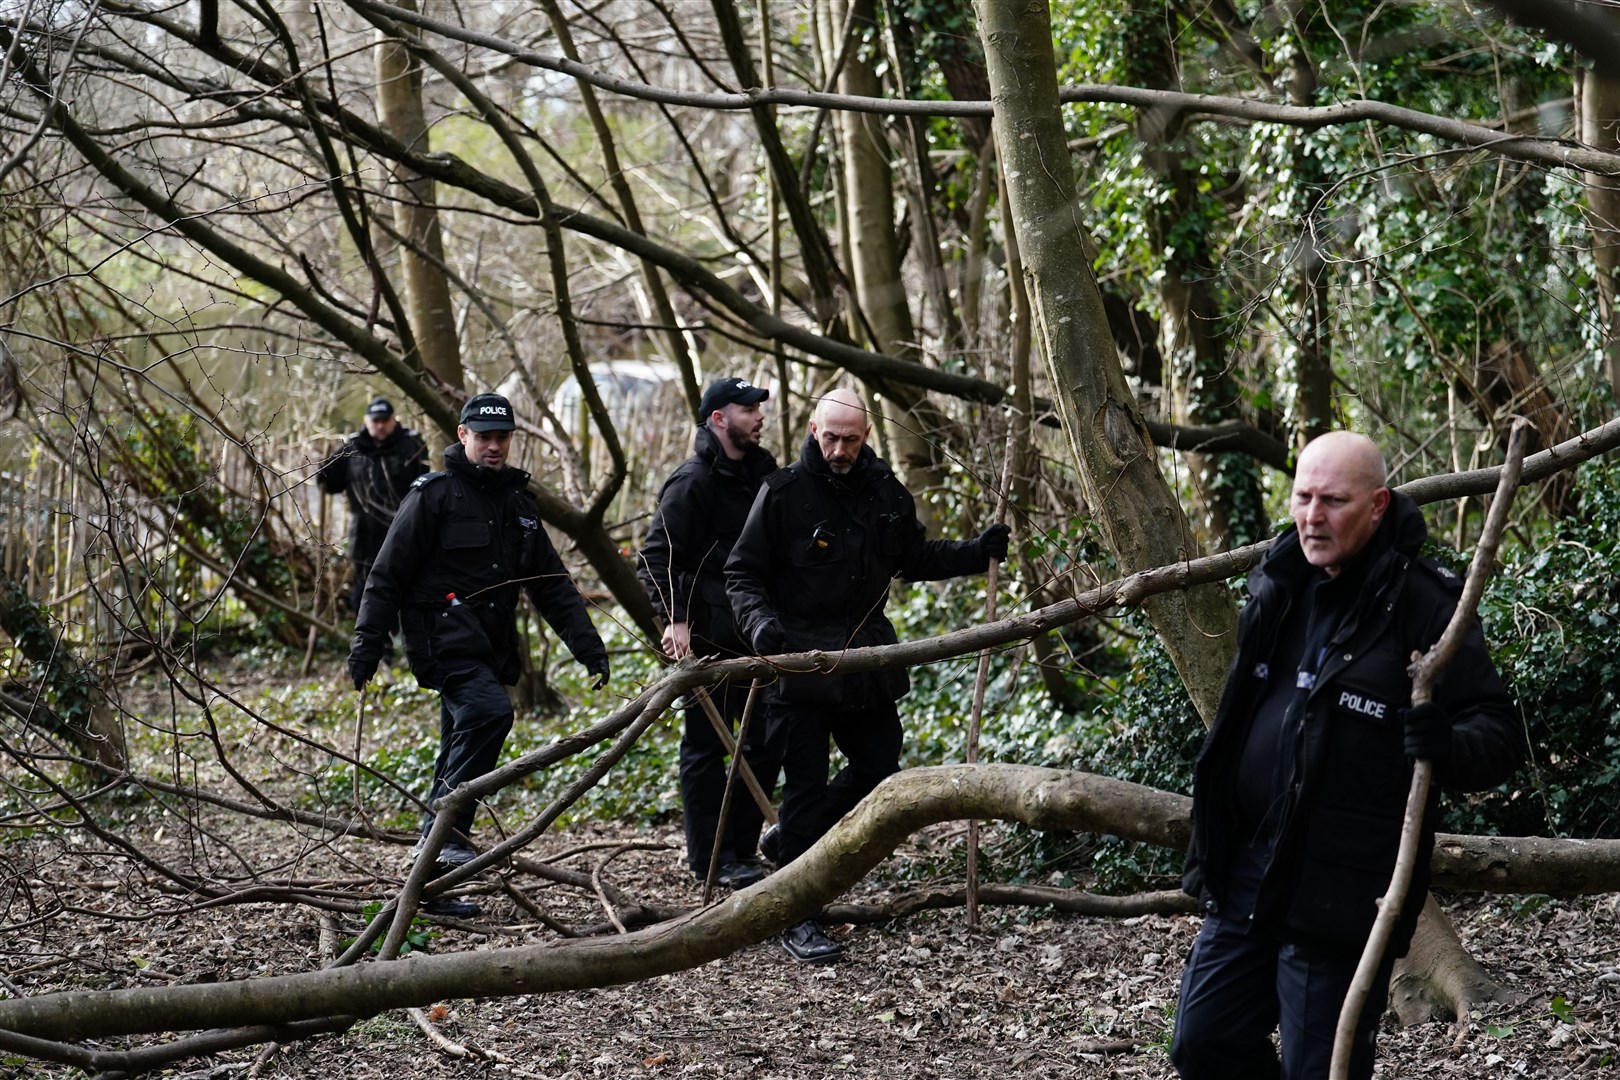 Police search teams scouring an area of woodland next to Golf Drive in Brighton (Jordan Pettitt/PA)